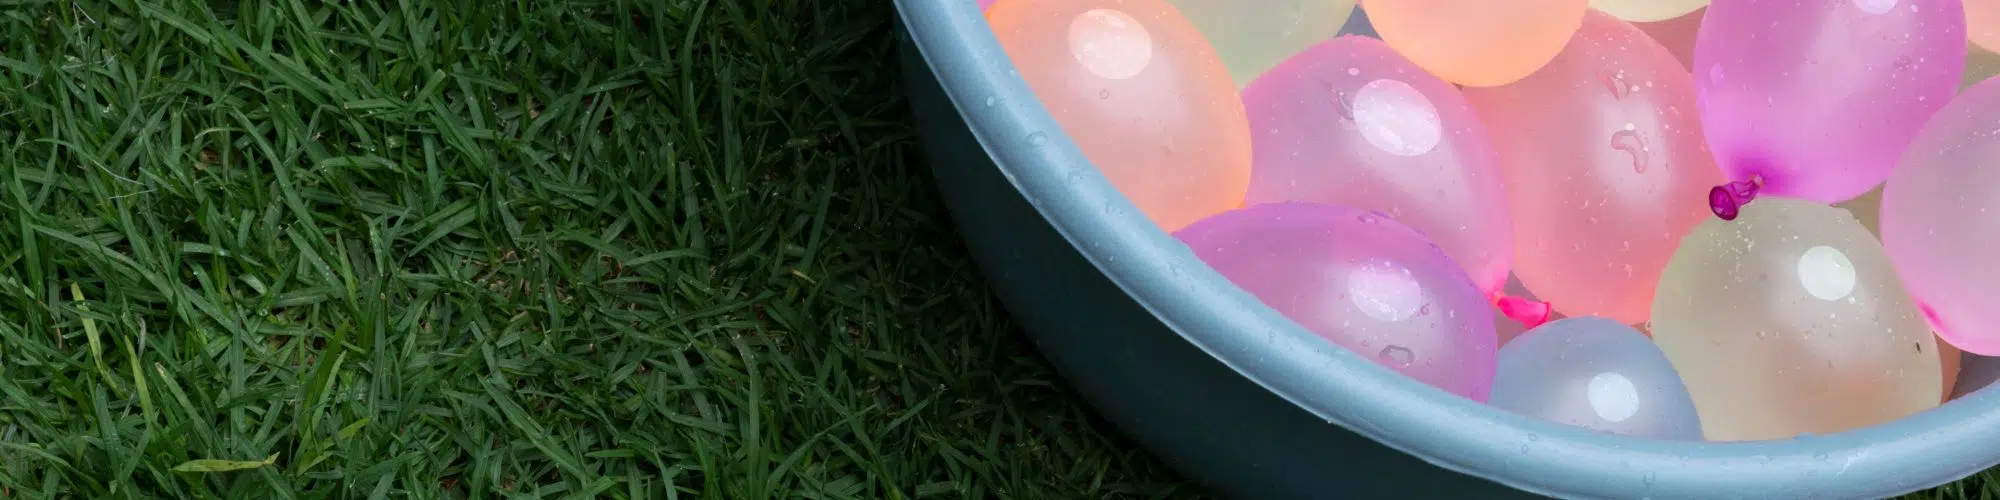 A close up of water balloons in a bin on the grass